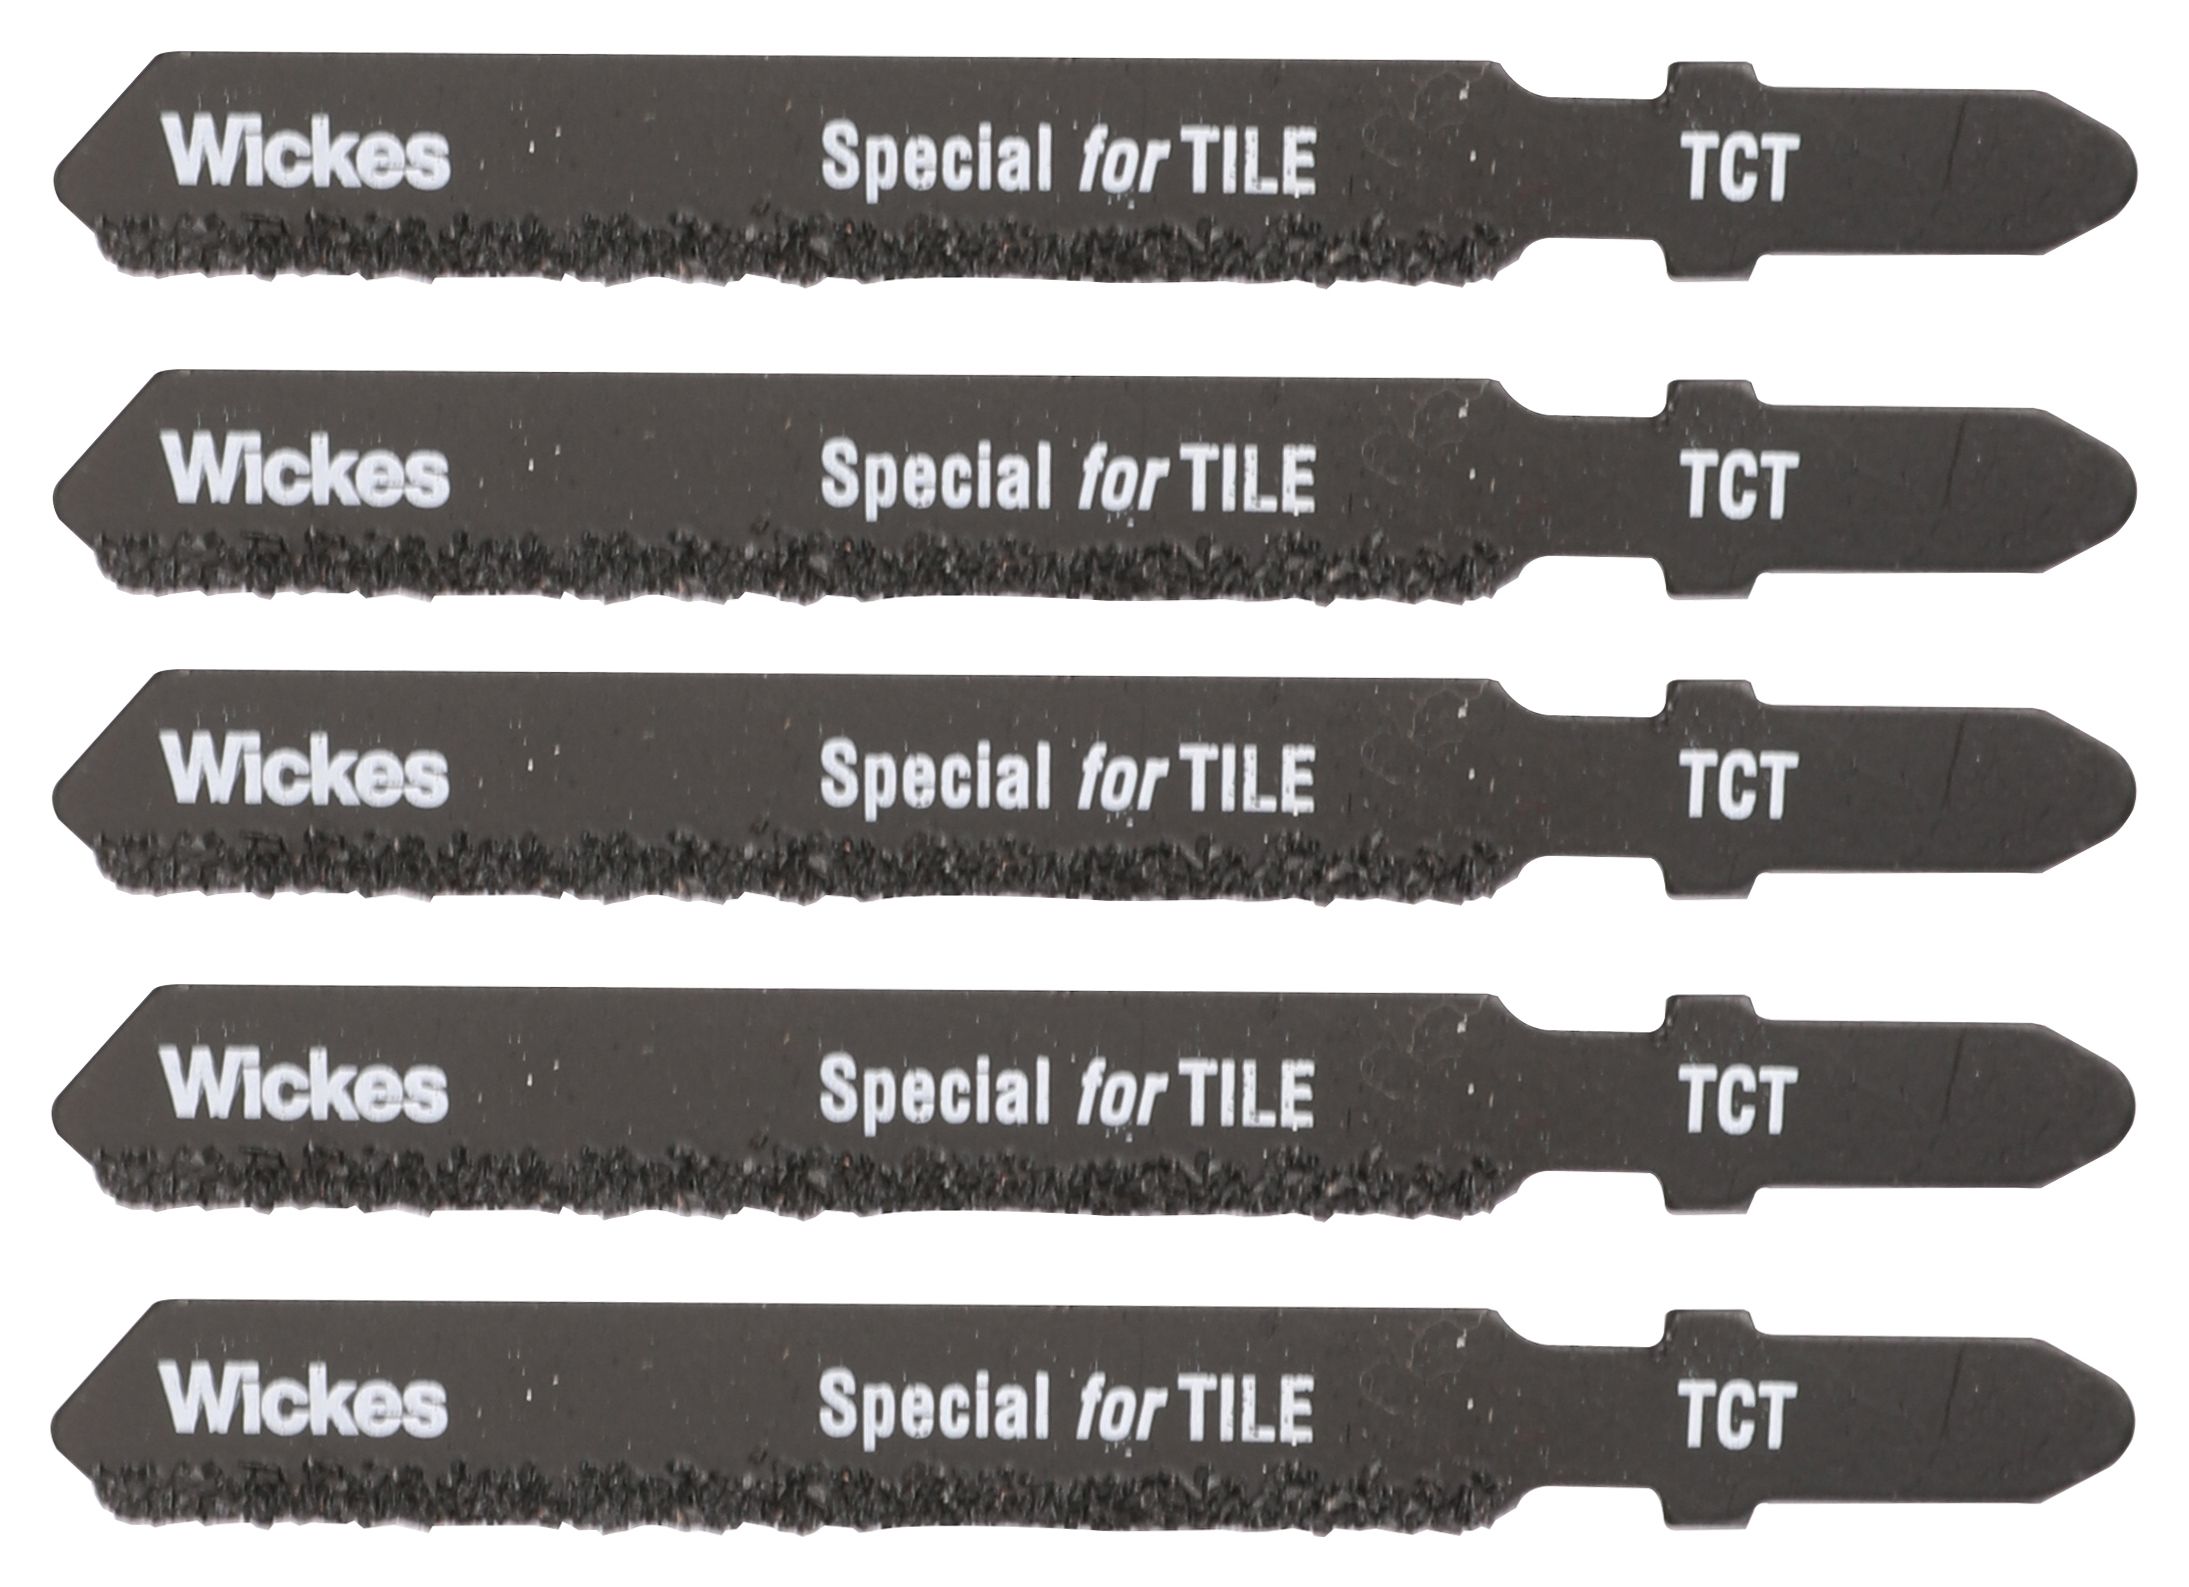 Image of Wickes T Shank Tungsten Carbide Jigsaw Blade for Tile - Pack of 5